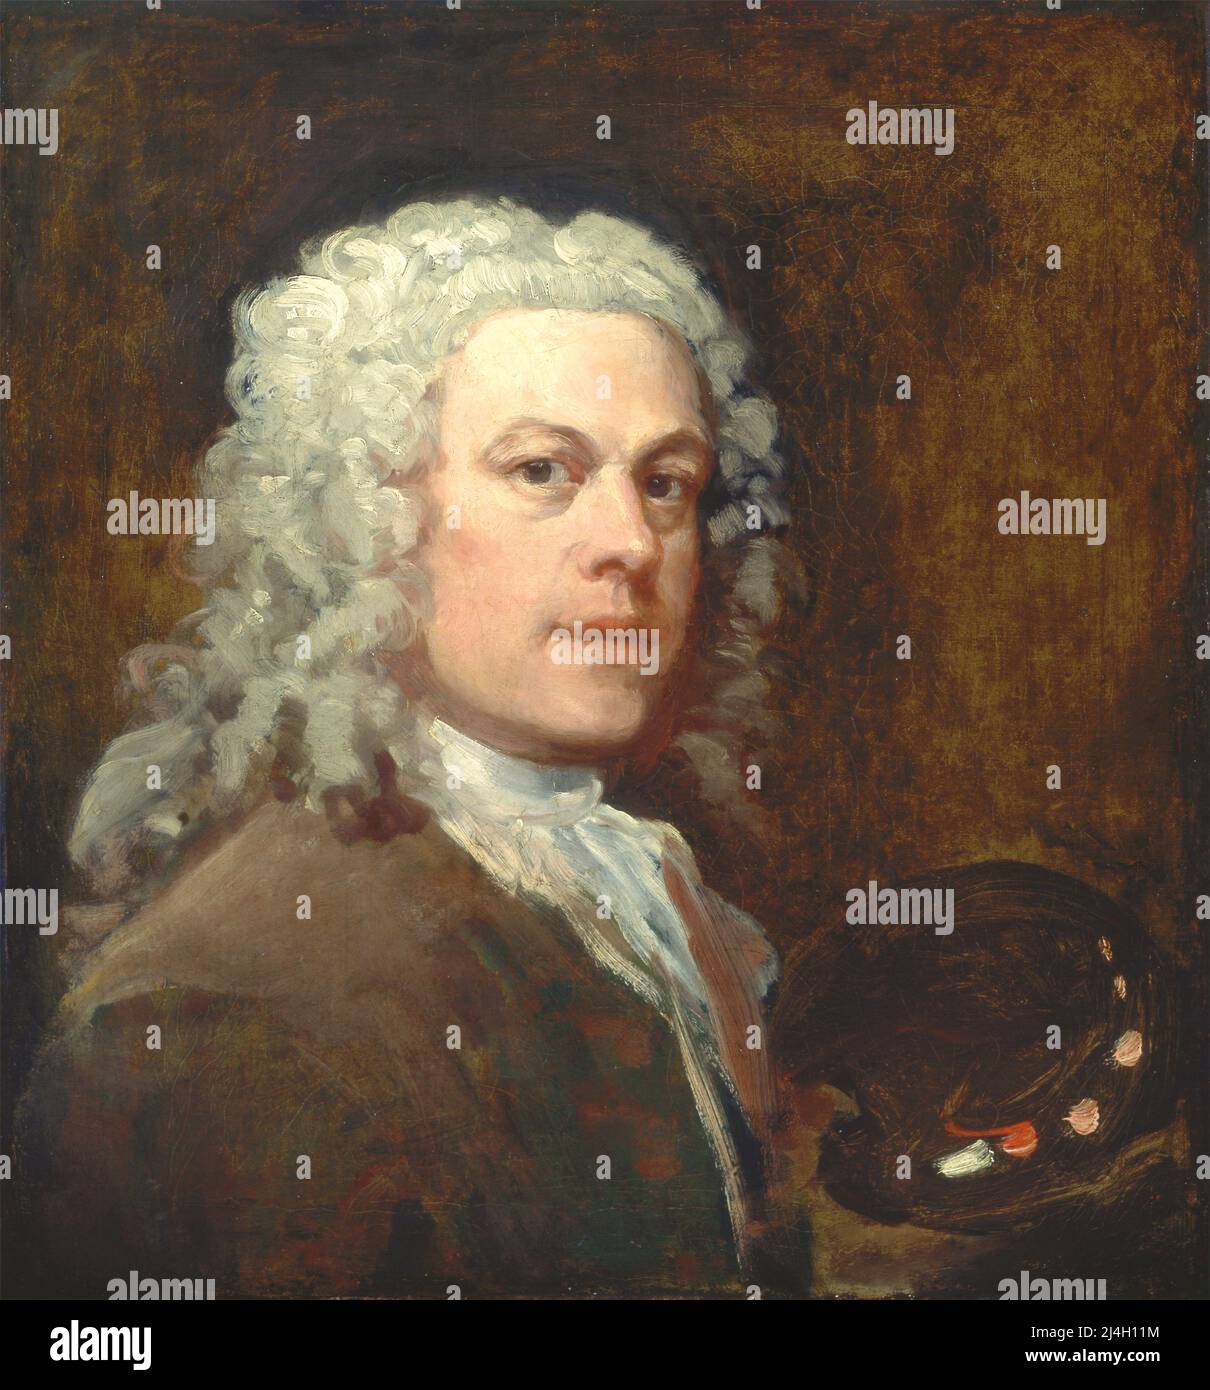 Self-Portrait by Hogarth, ca. 1735, Painting by William Hogarth Stock Photo